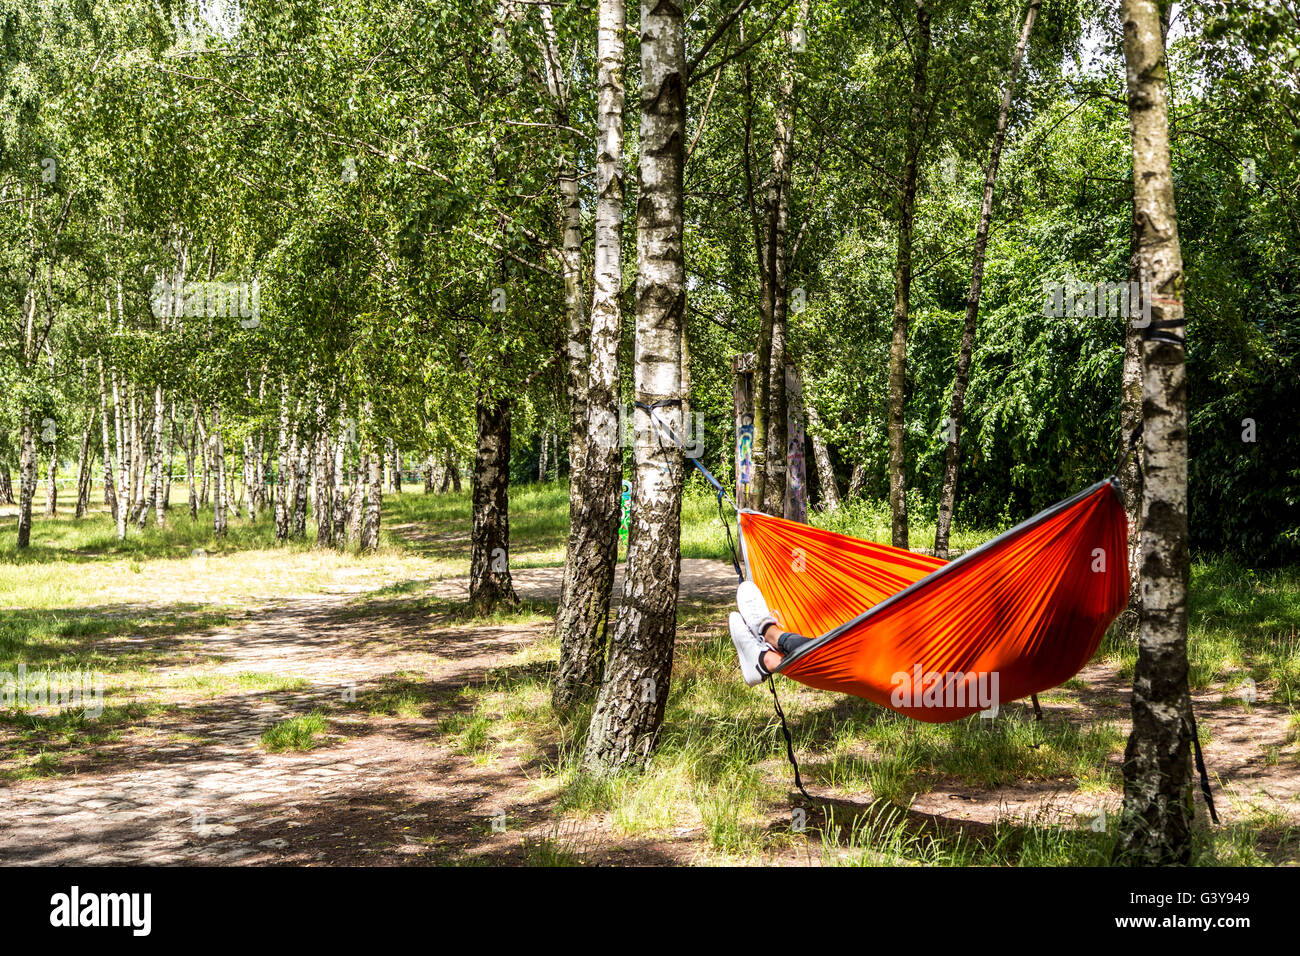 A red hammock is hanging between birch trees in a small forest, Stock Photo